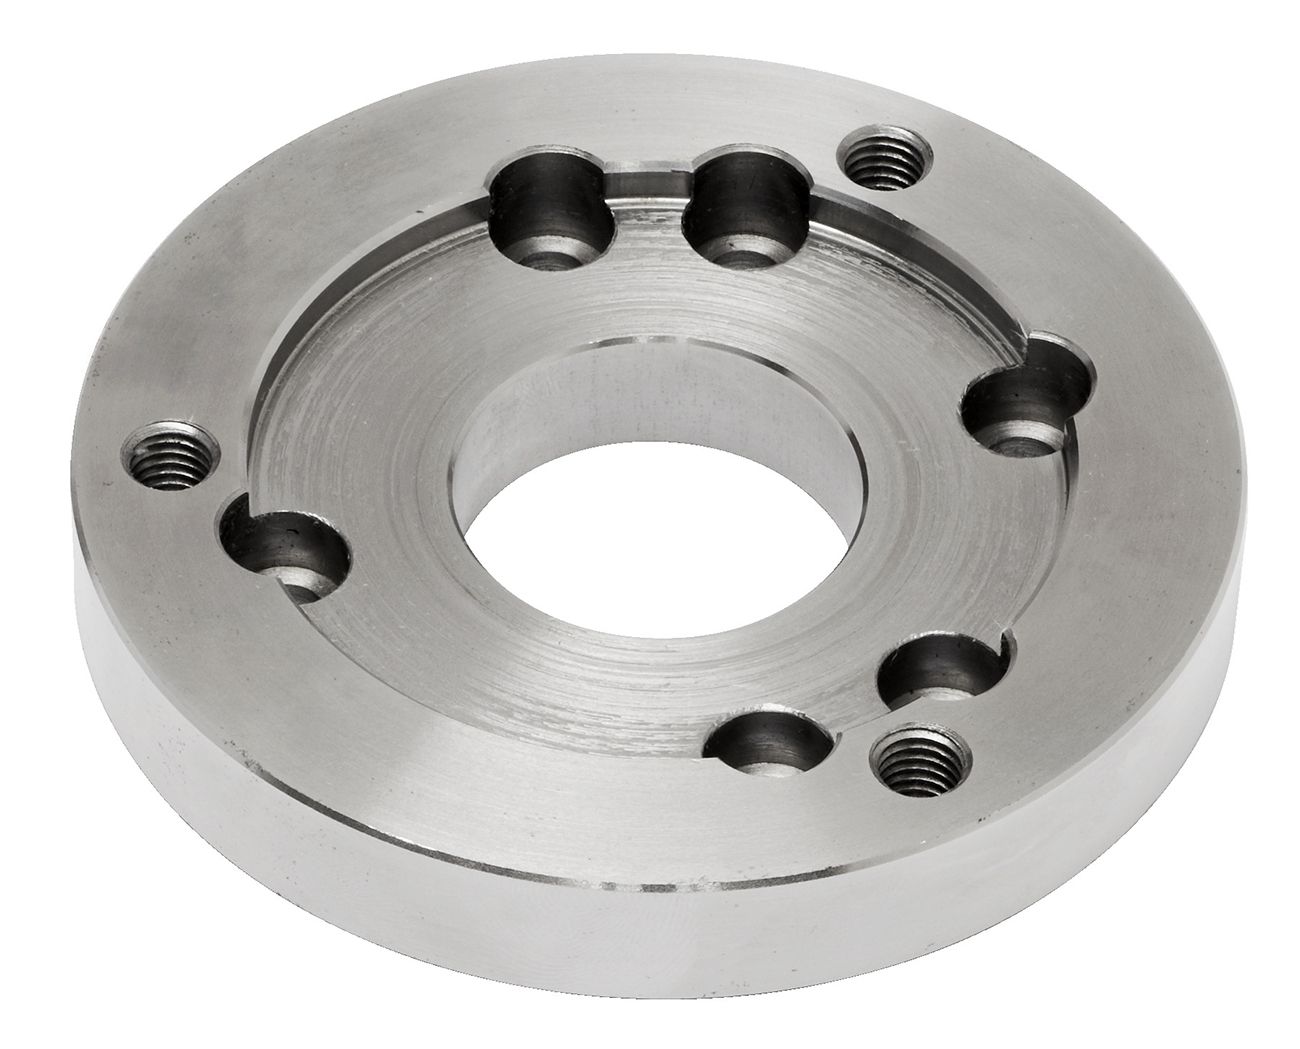 Flange for 80 mm Chucks for Wabeco Machines